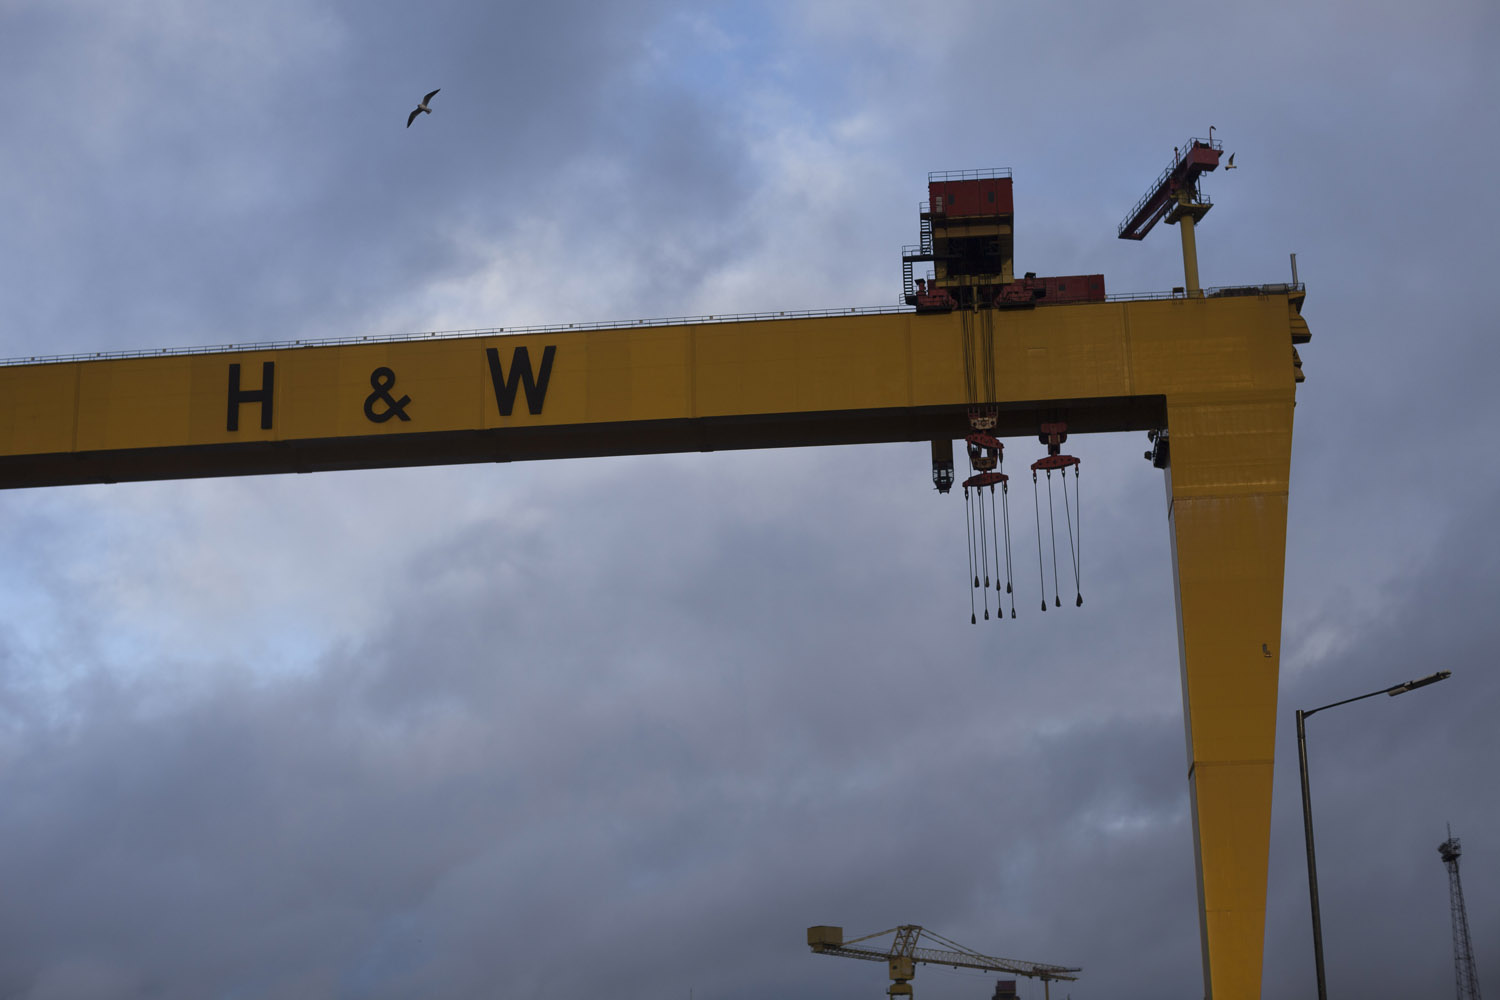 The “Samson and Goliath” cranes at the shipyards of Belfast, one of the city's main landmarks. These shipyards built the Titanic and once employed tens of thousands of workers, mostly drawn from the Protestant part the city, East Belfast. With the economy in crisis, the rest of the docks are slowly being turned into a business and leisure development and the shipyards are mostly deserted, yet they remain a powerful symbol of the working class history of the city, especially among the Protestant population.